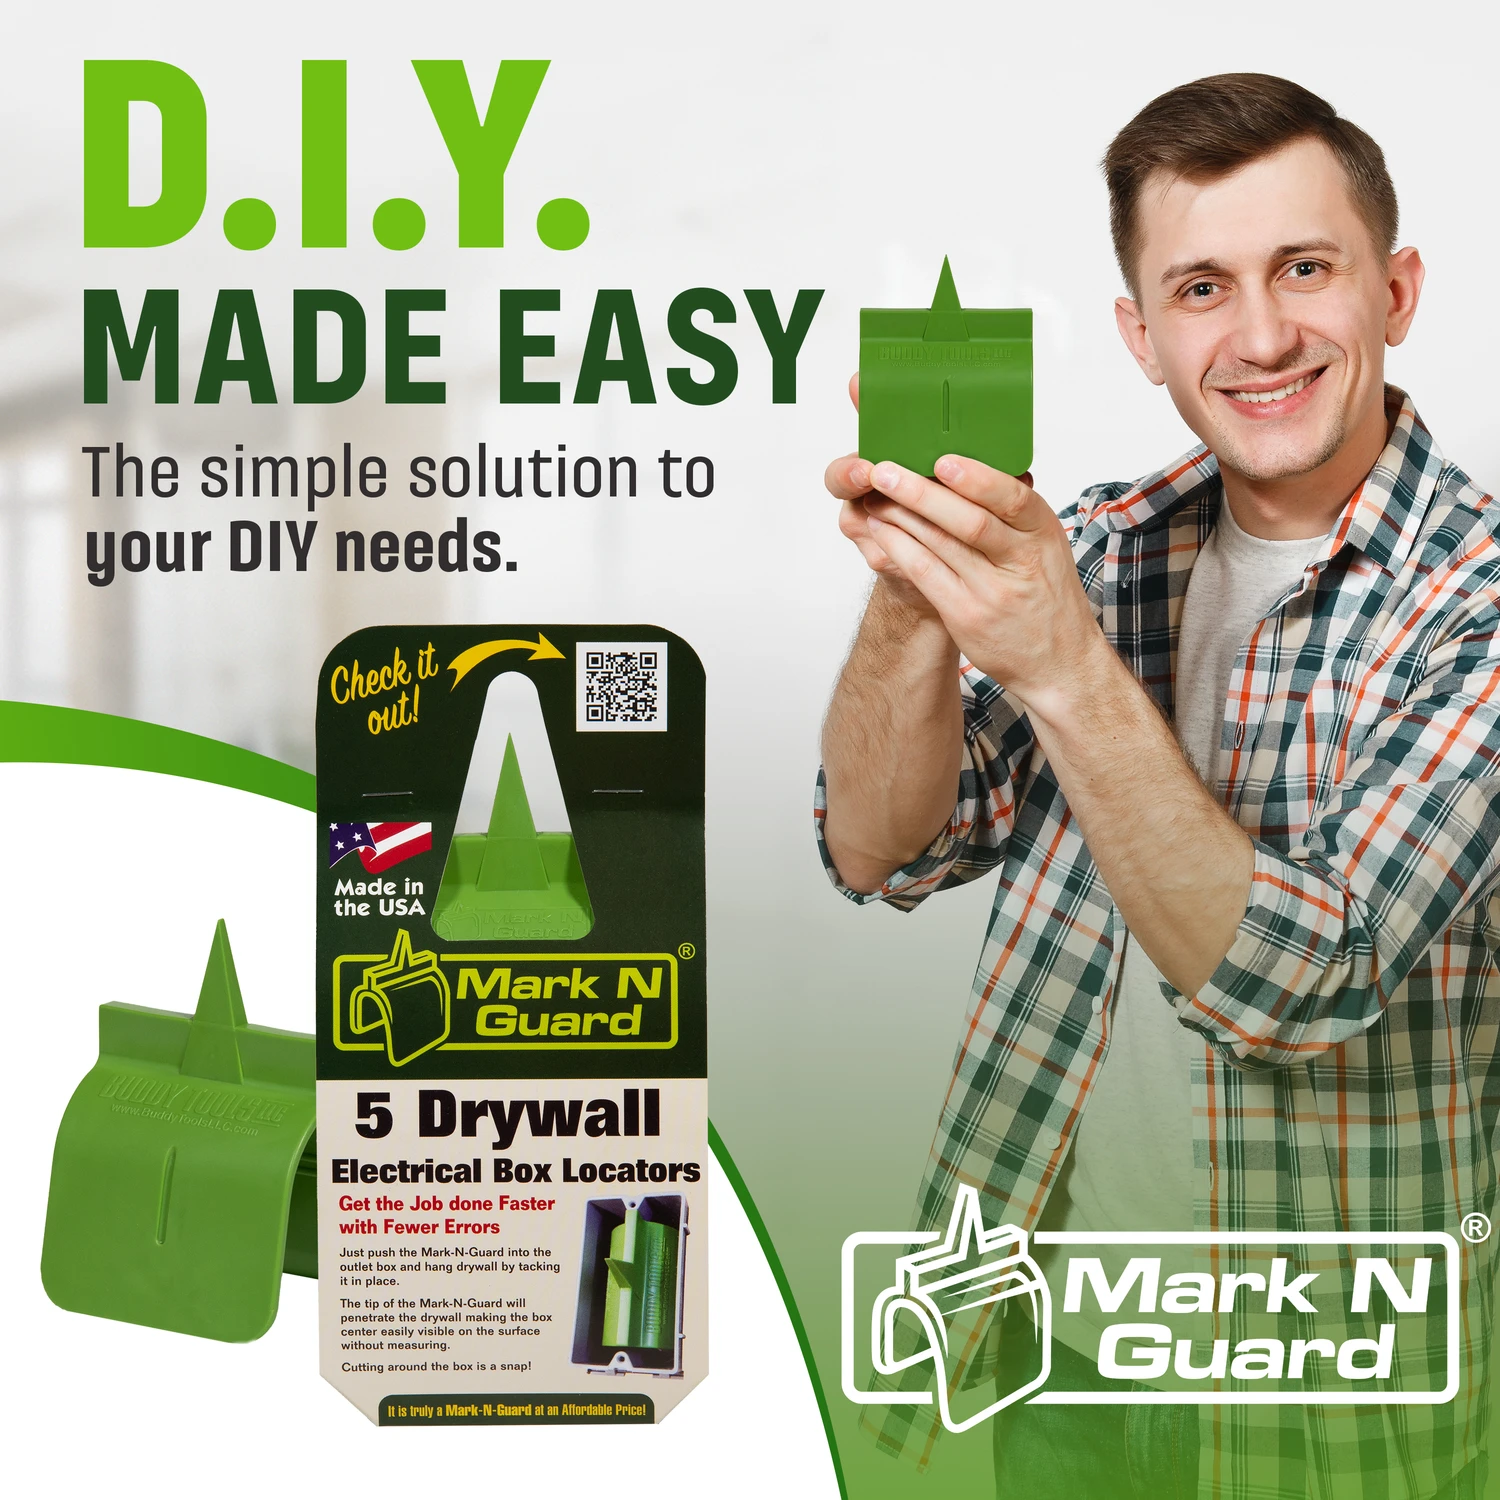 Dry wall kits and tools from Buddy Tools, LLC